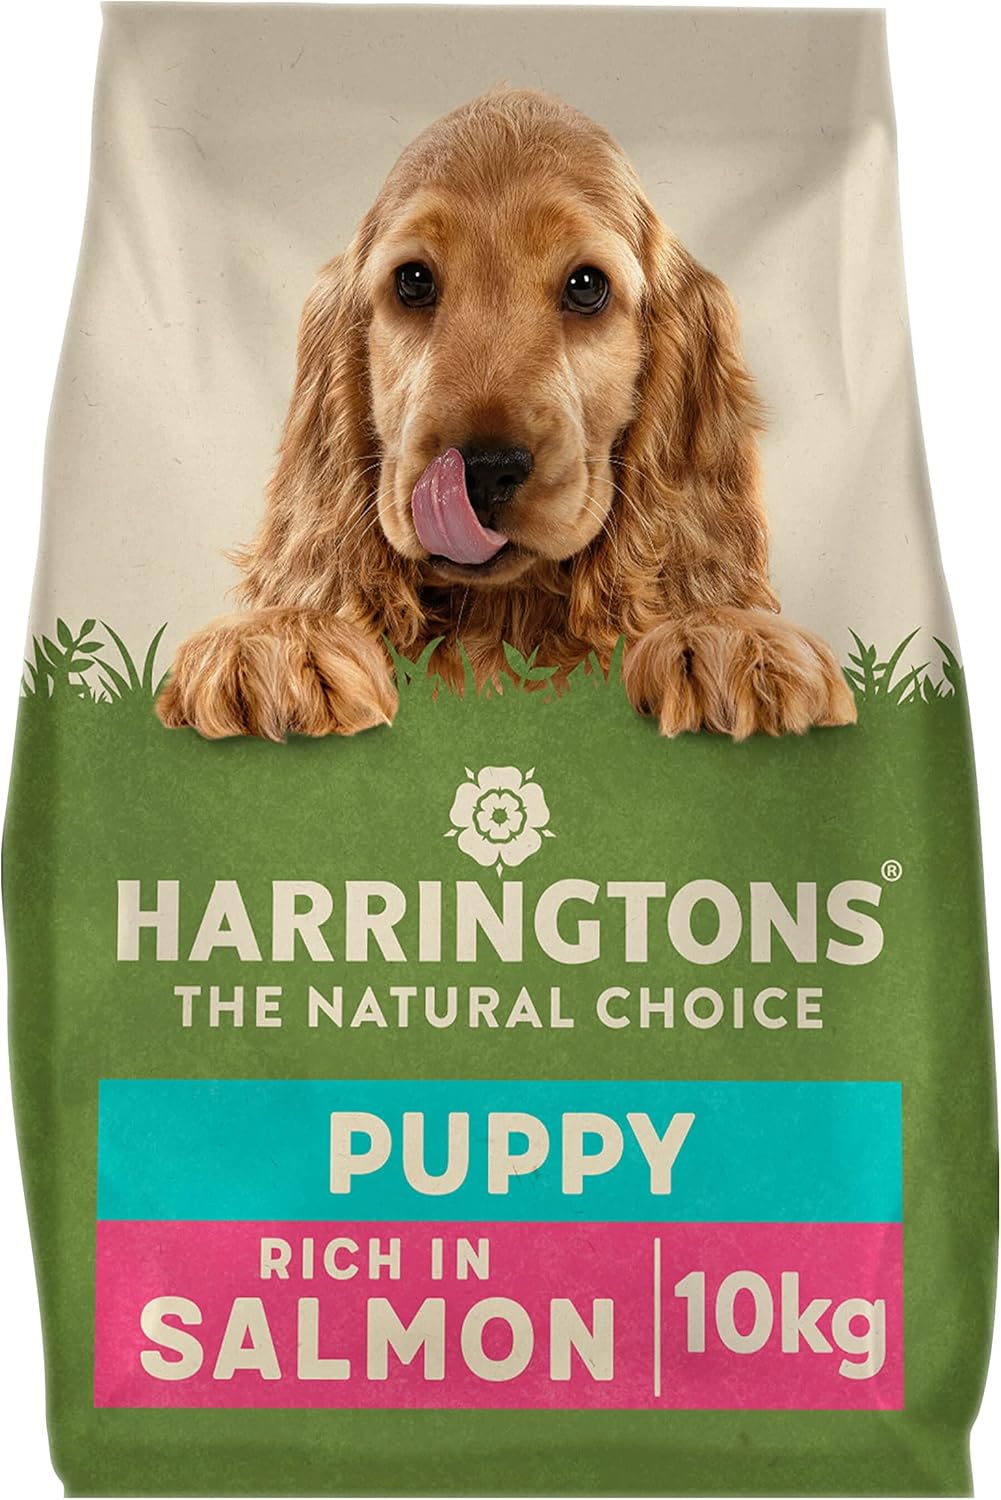 Harringtons Complete Dry Puppy Food Salmon & Rice 10kg - Made with All Natural Ingredients?HARRPUPS-10